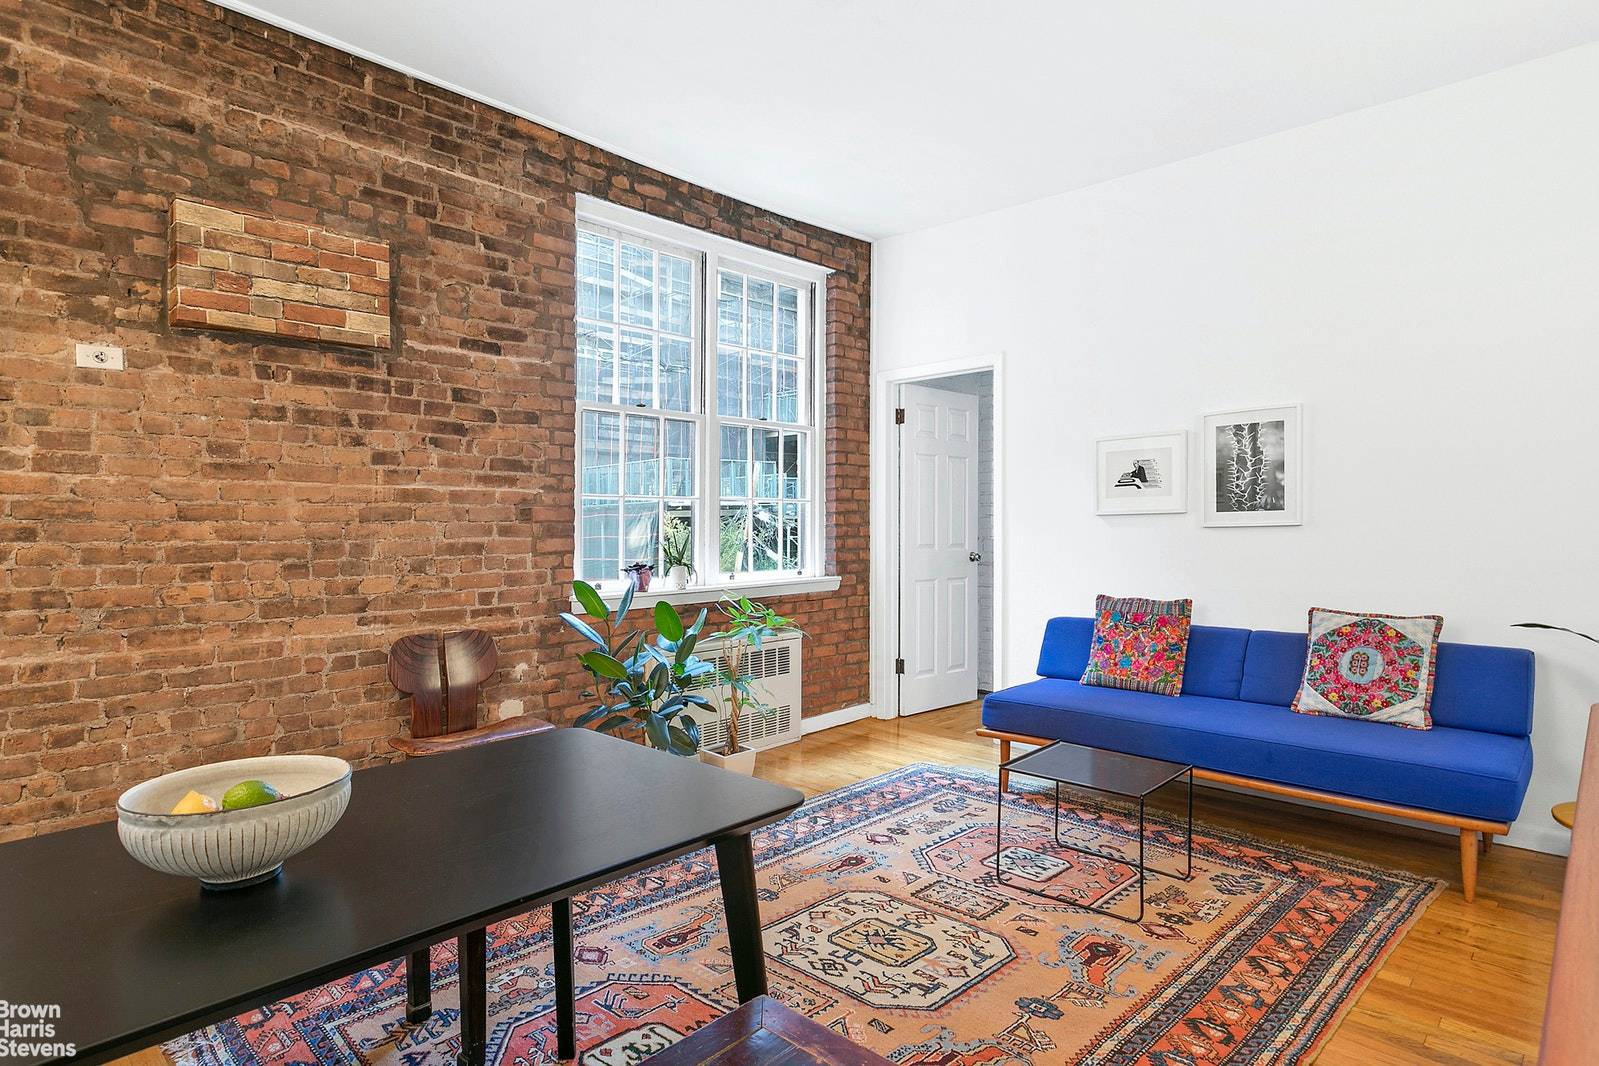 Welcome to 135 Amity Street, a one of a kind, charming and spacious corner true 2 bedroom 1.